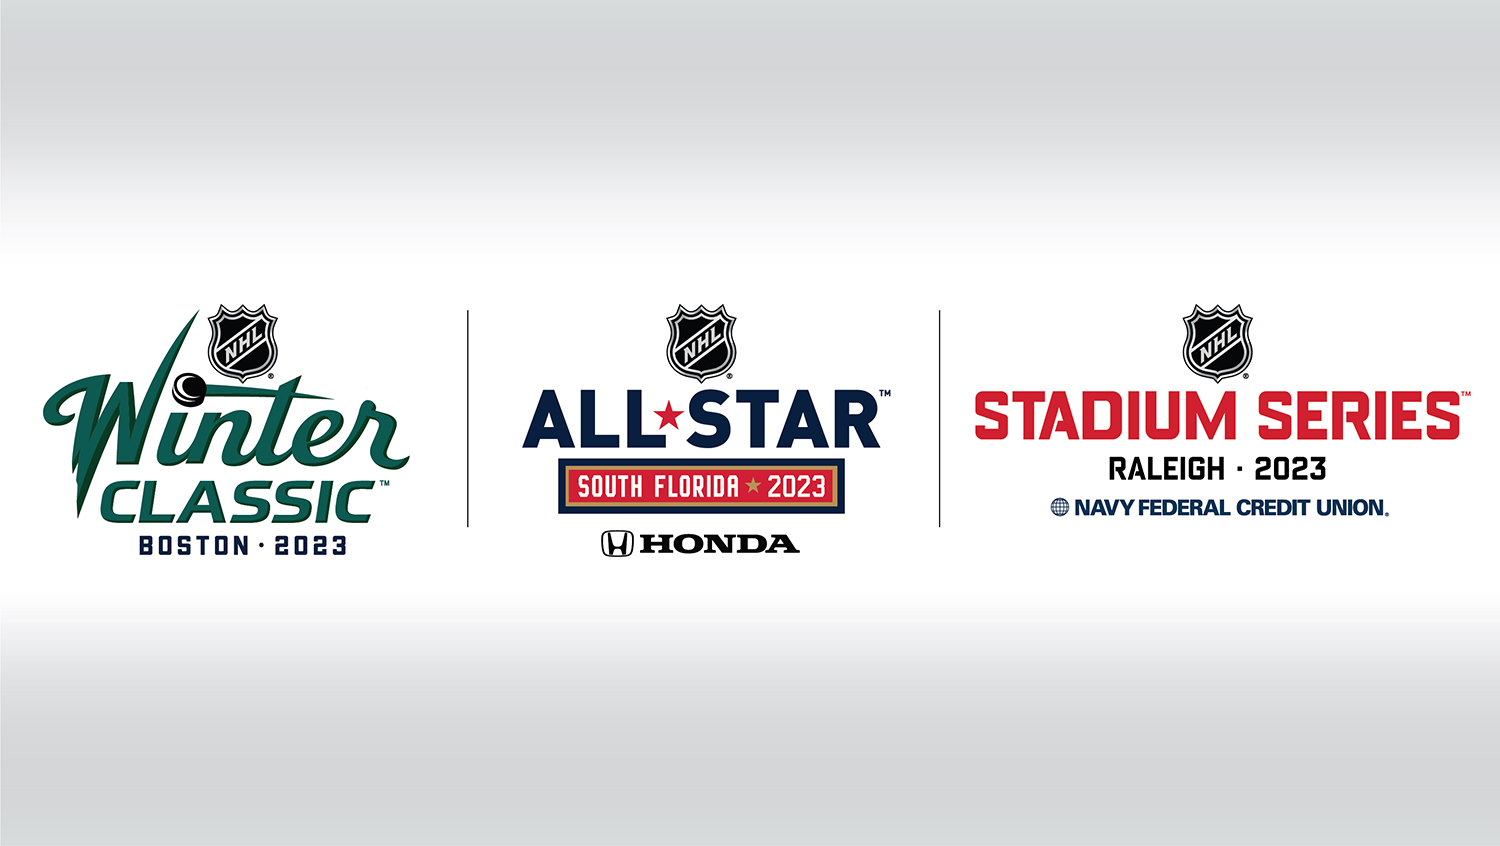 2023 Navy Federal Credit Union NHL Stadium Series to Feature